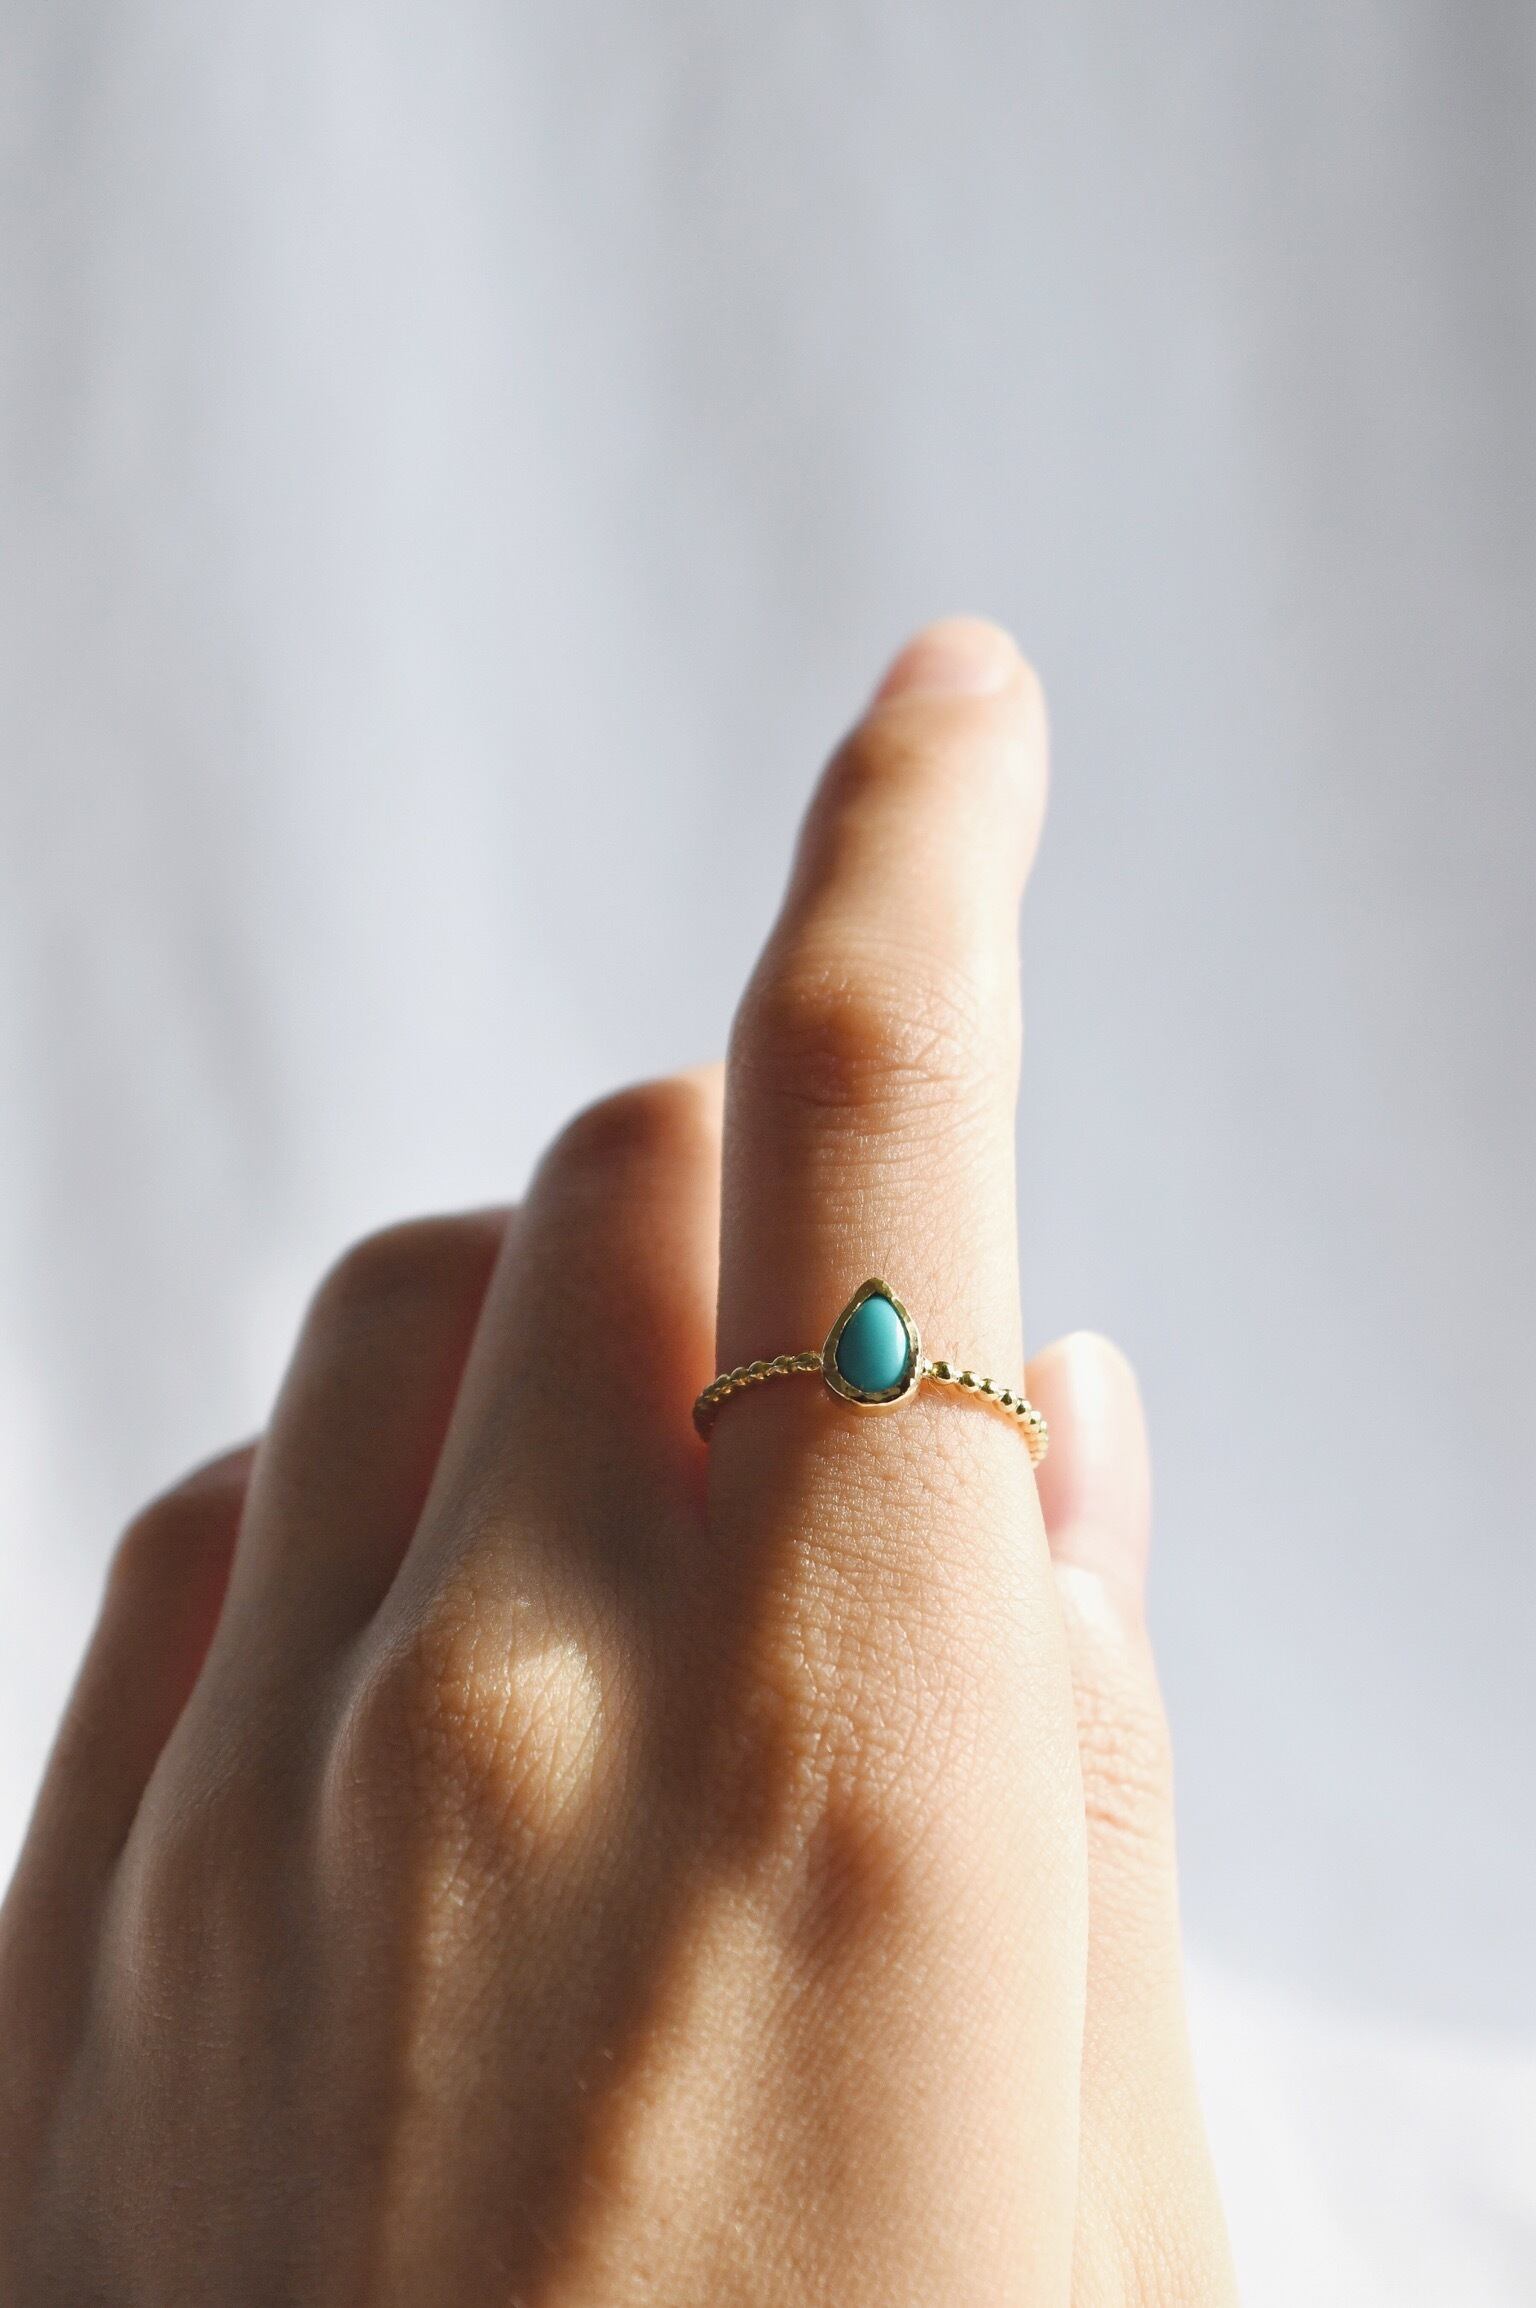 K18 Seed & Grain Turquoise Ring 18金 種と粒のターコイズリング | quirk of Fate powered by  BASE